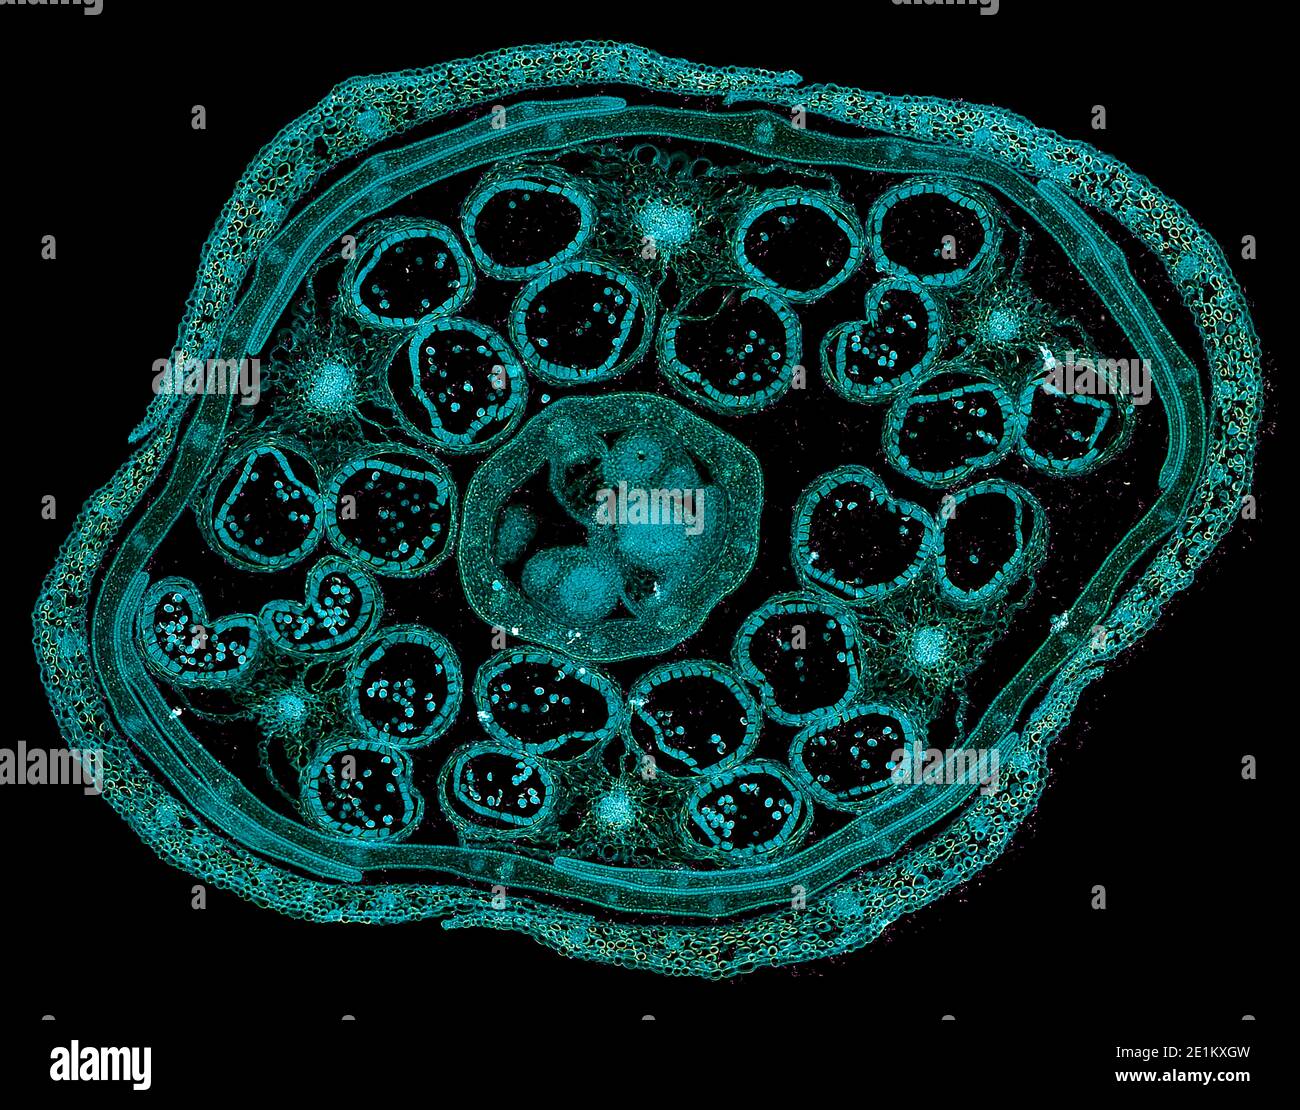 cross section cut of human body cells under a scientific microscope Stock Photo